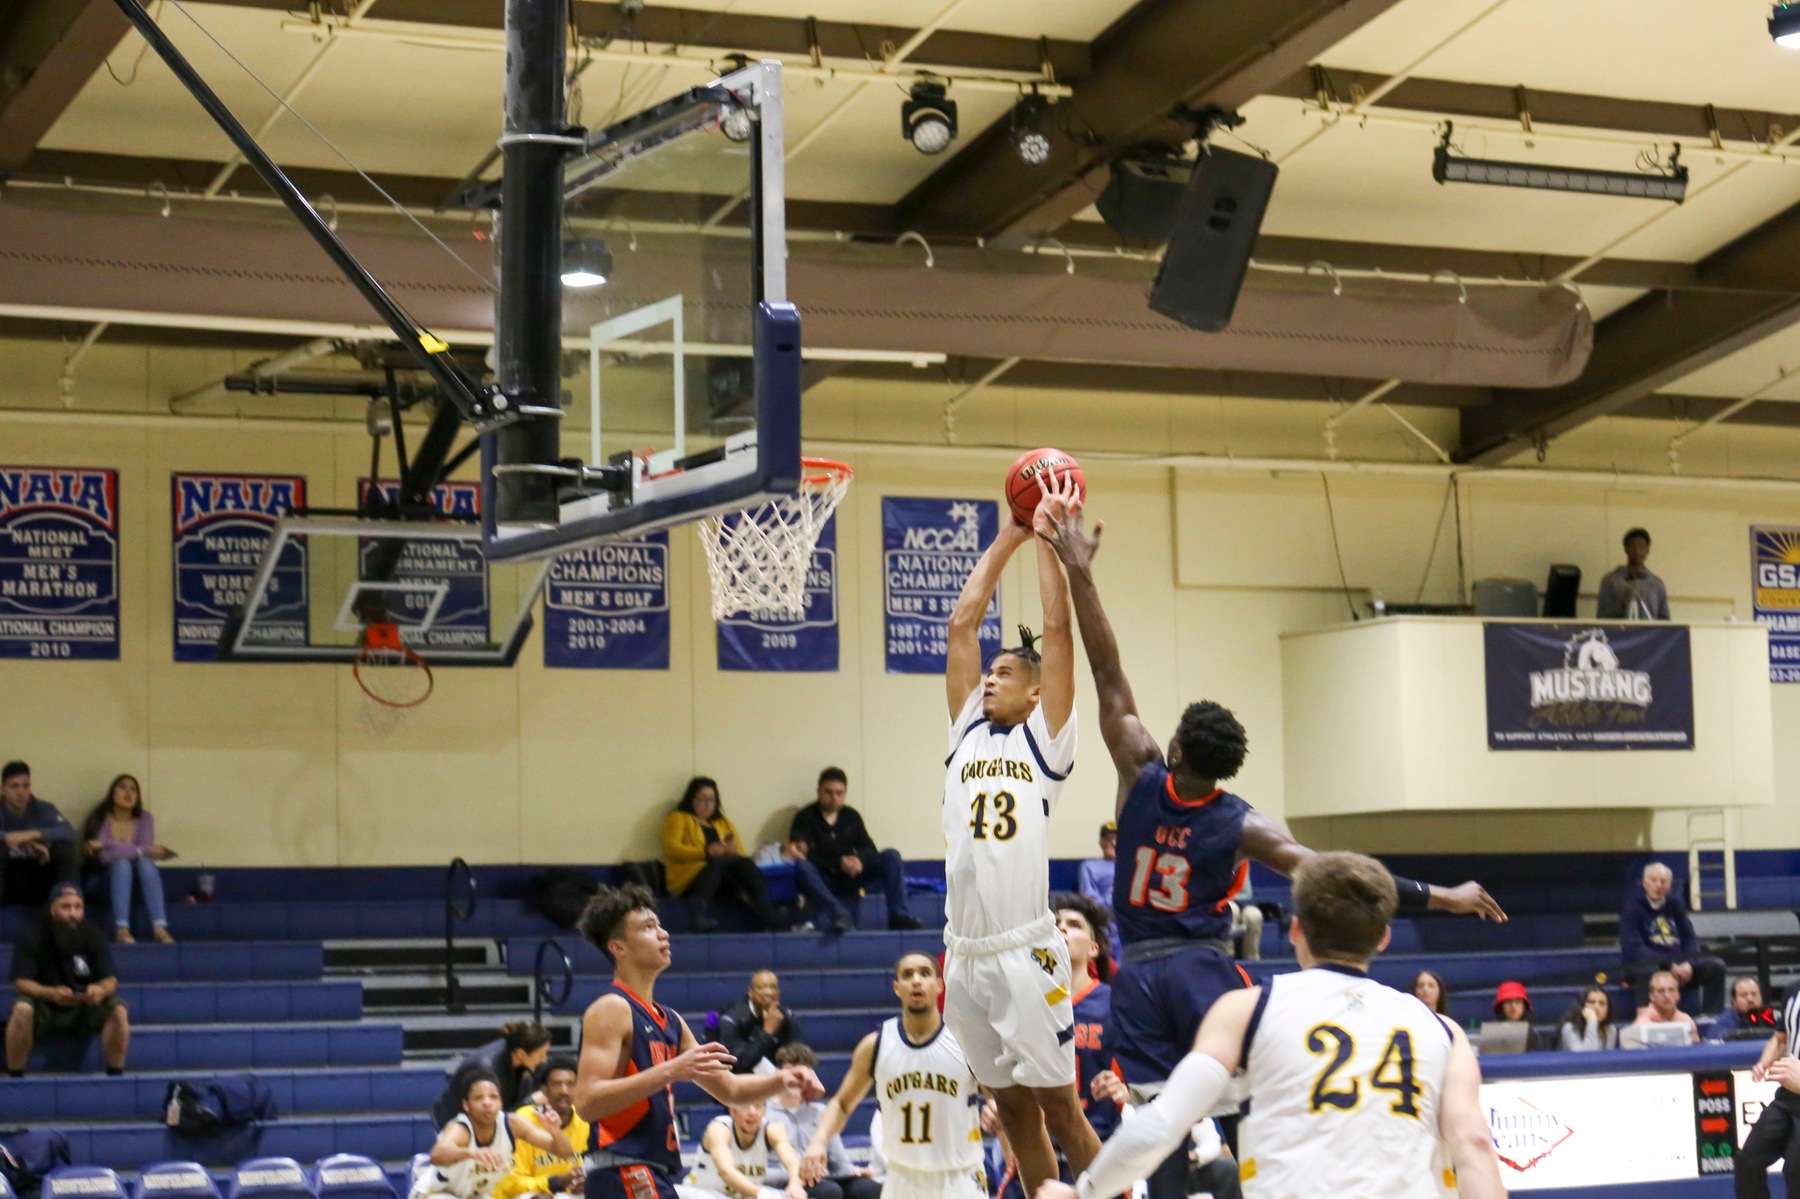 College of the Canyons men's basketball vs. Orange Coast College on Friday, Dec. 27,2019.